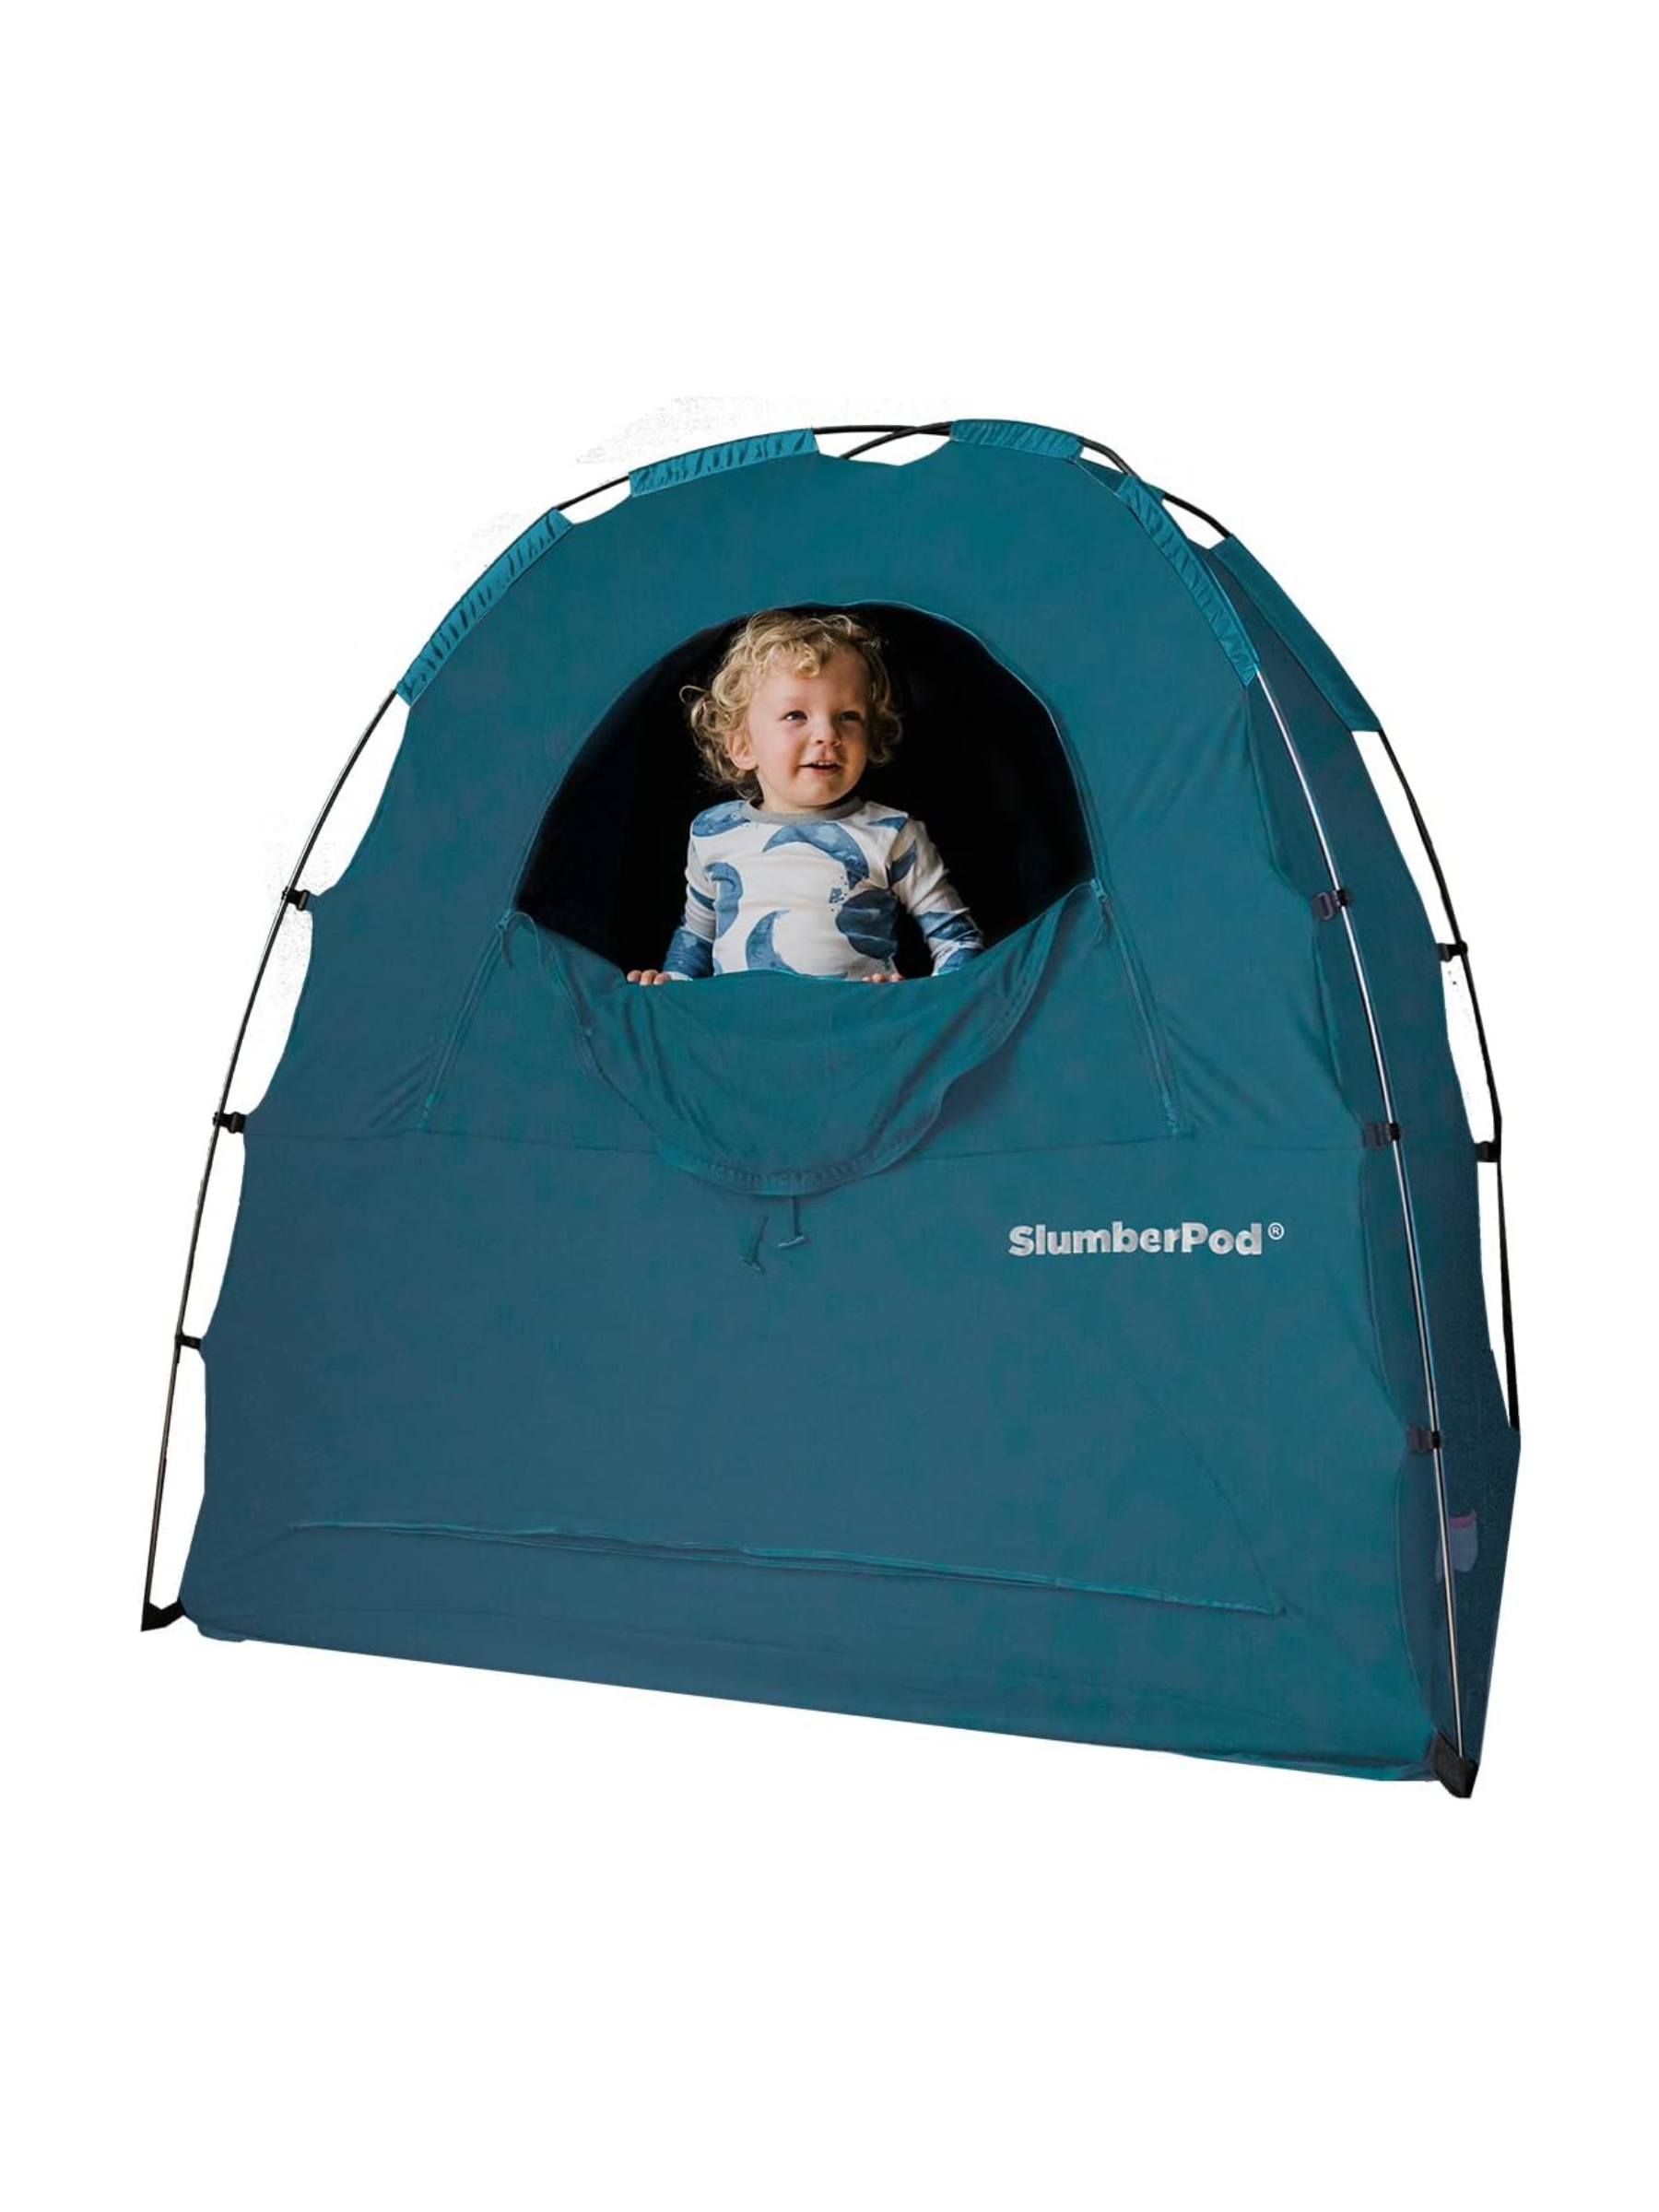 <p>The SlumberPod is the answer to hotel room sharing with a curious toddler. A blackout tent that pops over any travel crib, it allows parents to stay up past their kids’ bedtime while ensuring they snooze away in their own little cocoon.</p> <p><strong>What our expert says:</strong> Okay, this is more of a gift for the parents, but when I asked my friends what their number one necessary product was for traveling with toddlers they all told me this. Seriously, it works, and it’s a great way to show the toddler parents in your life you are wishing them happy trails. <em>-SM</em></p> $180, Amazon. <a href="https://www.amazon.com/SlumberPod-3-0-Portable-Blackout-Sleeping/dp/B0B7P6N3JN?">Get it now!</a><p>Sign up for today’s biggest stories, from pop culture to politics.</p><a href="https://www.glamour.com/newsletter/news?sourceCode=msnsend">Sign Up</a>